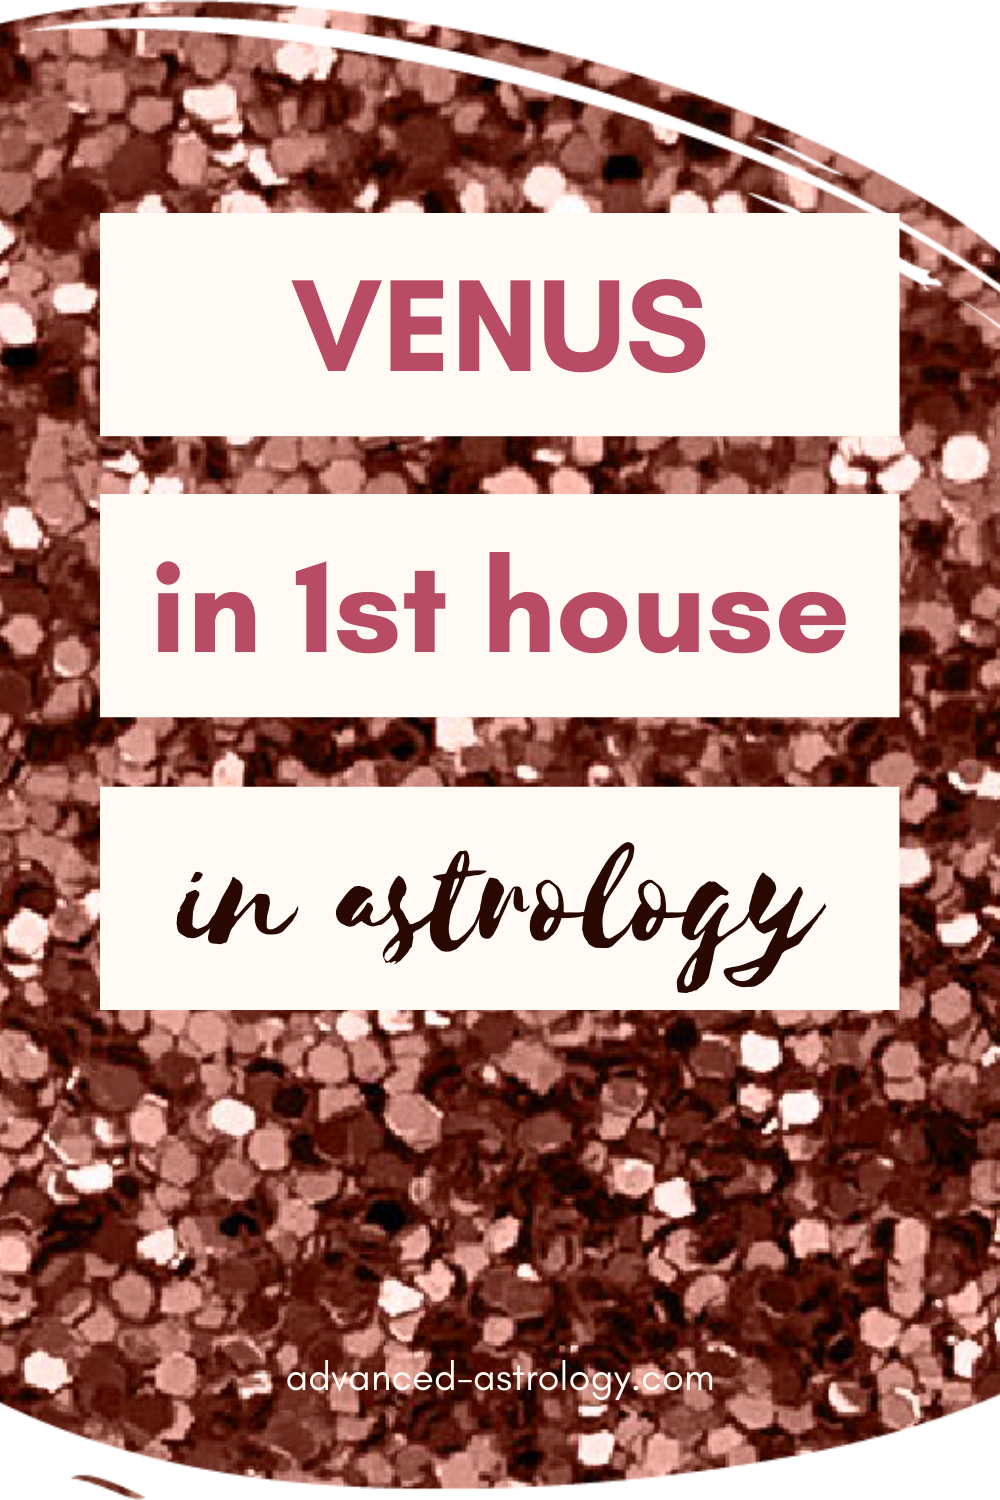 venus in 1st house cafe astrology